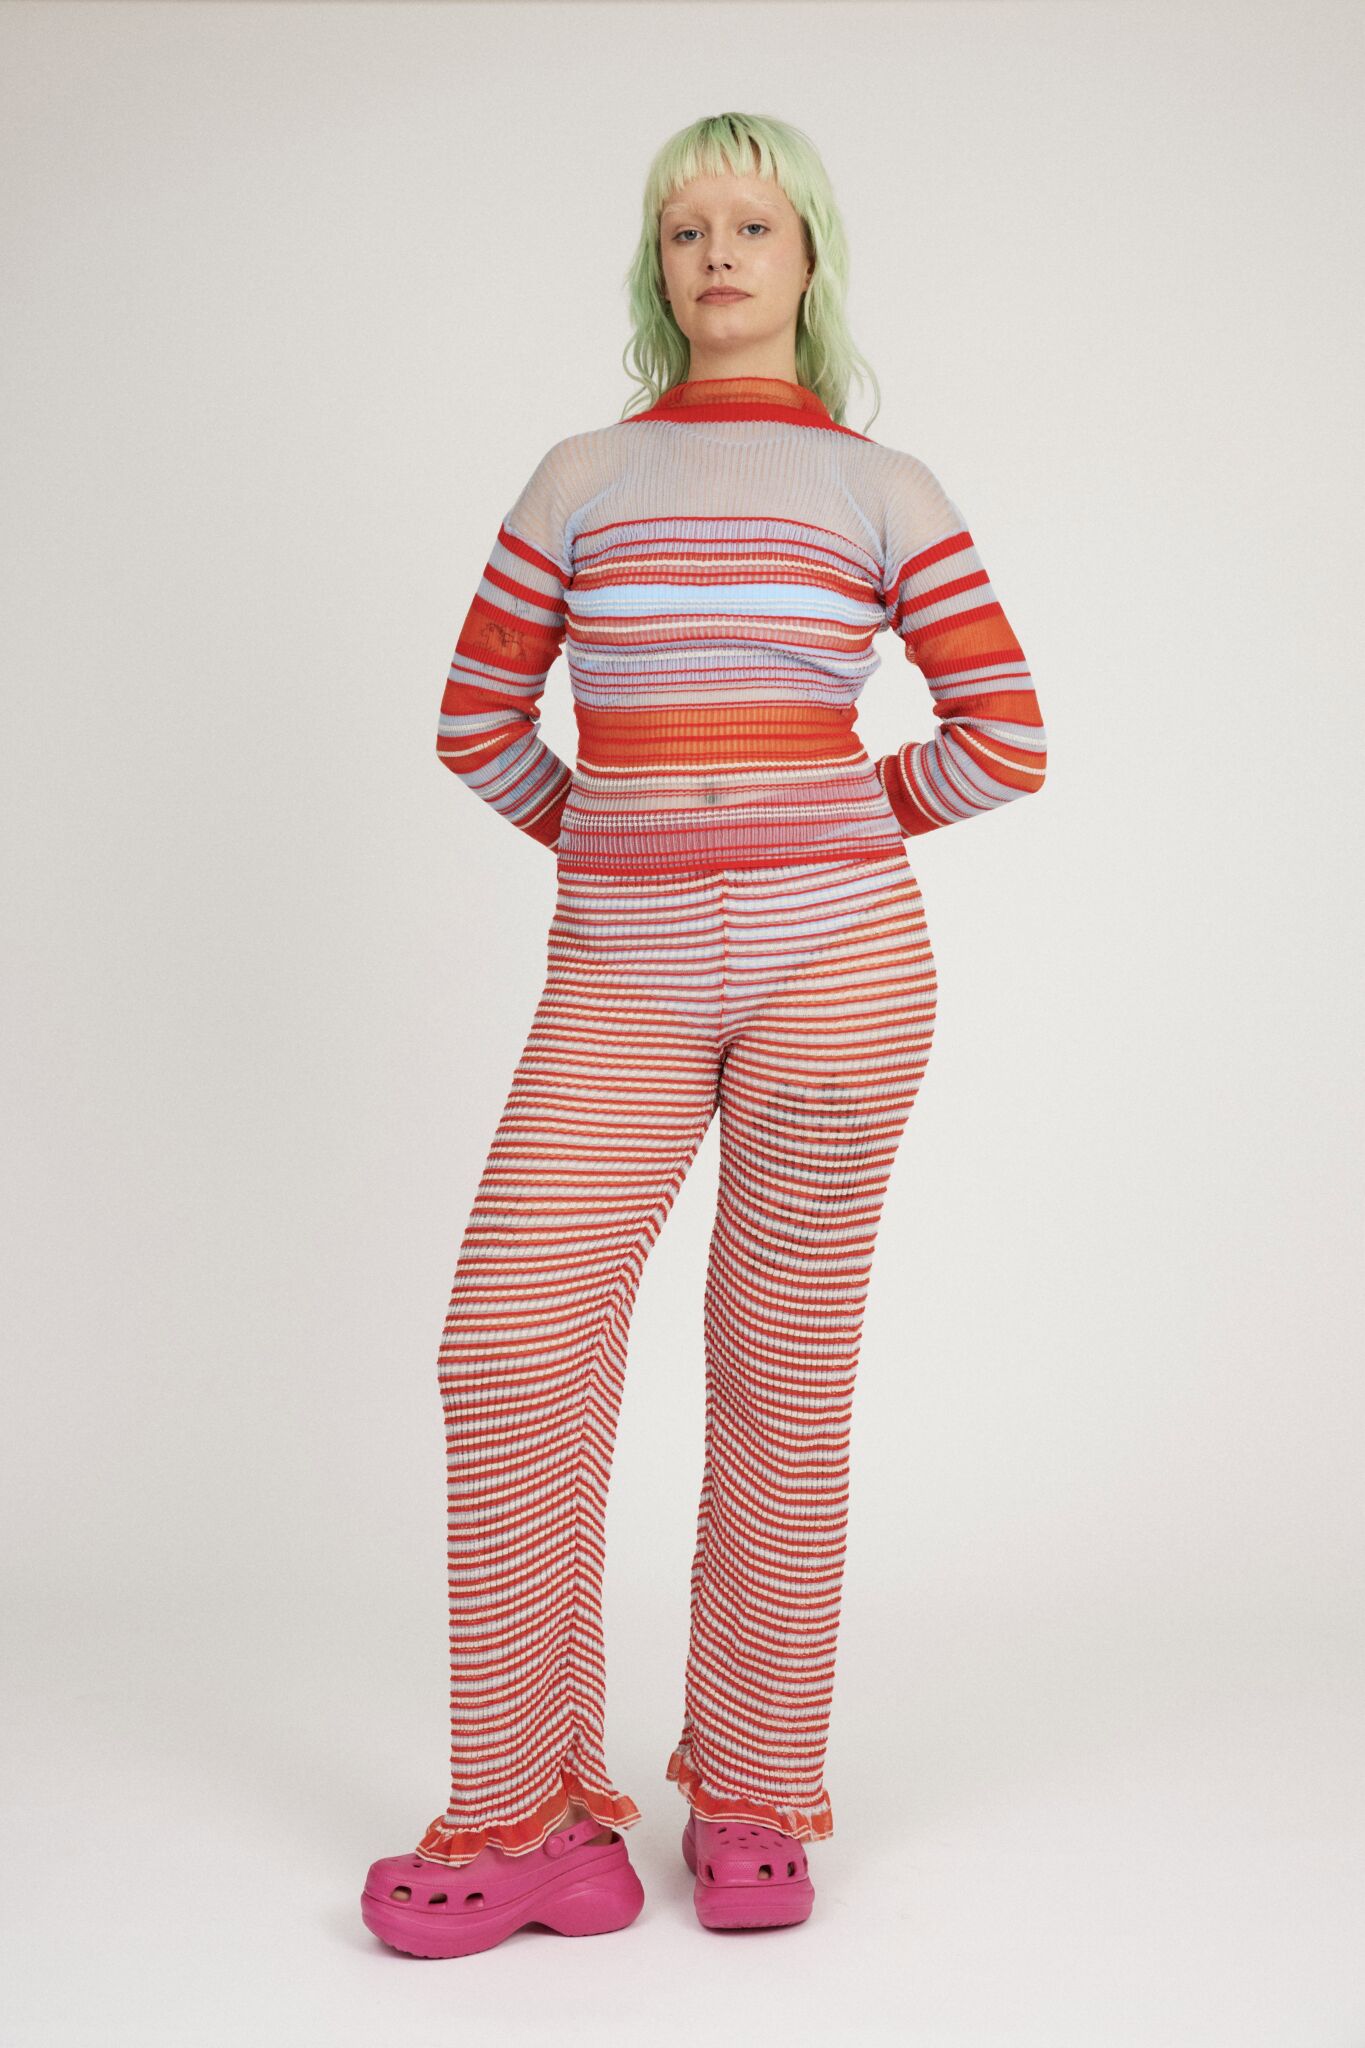 Sweet Secret Trouser in coral red and light blue are a knitted pair of transparent trousers in all over stripes with shimmery metallized yarn. The textile is lightweight, delicate and very flexible. The trousers have a body fitted silhouette that adapts to the body. Wide legged and detailed with frills and a logo waistband.